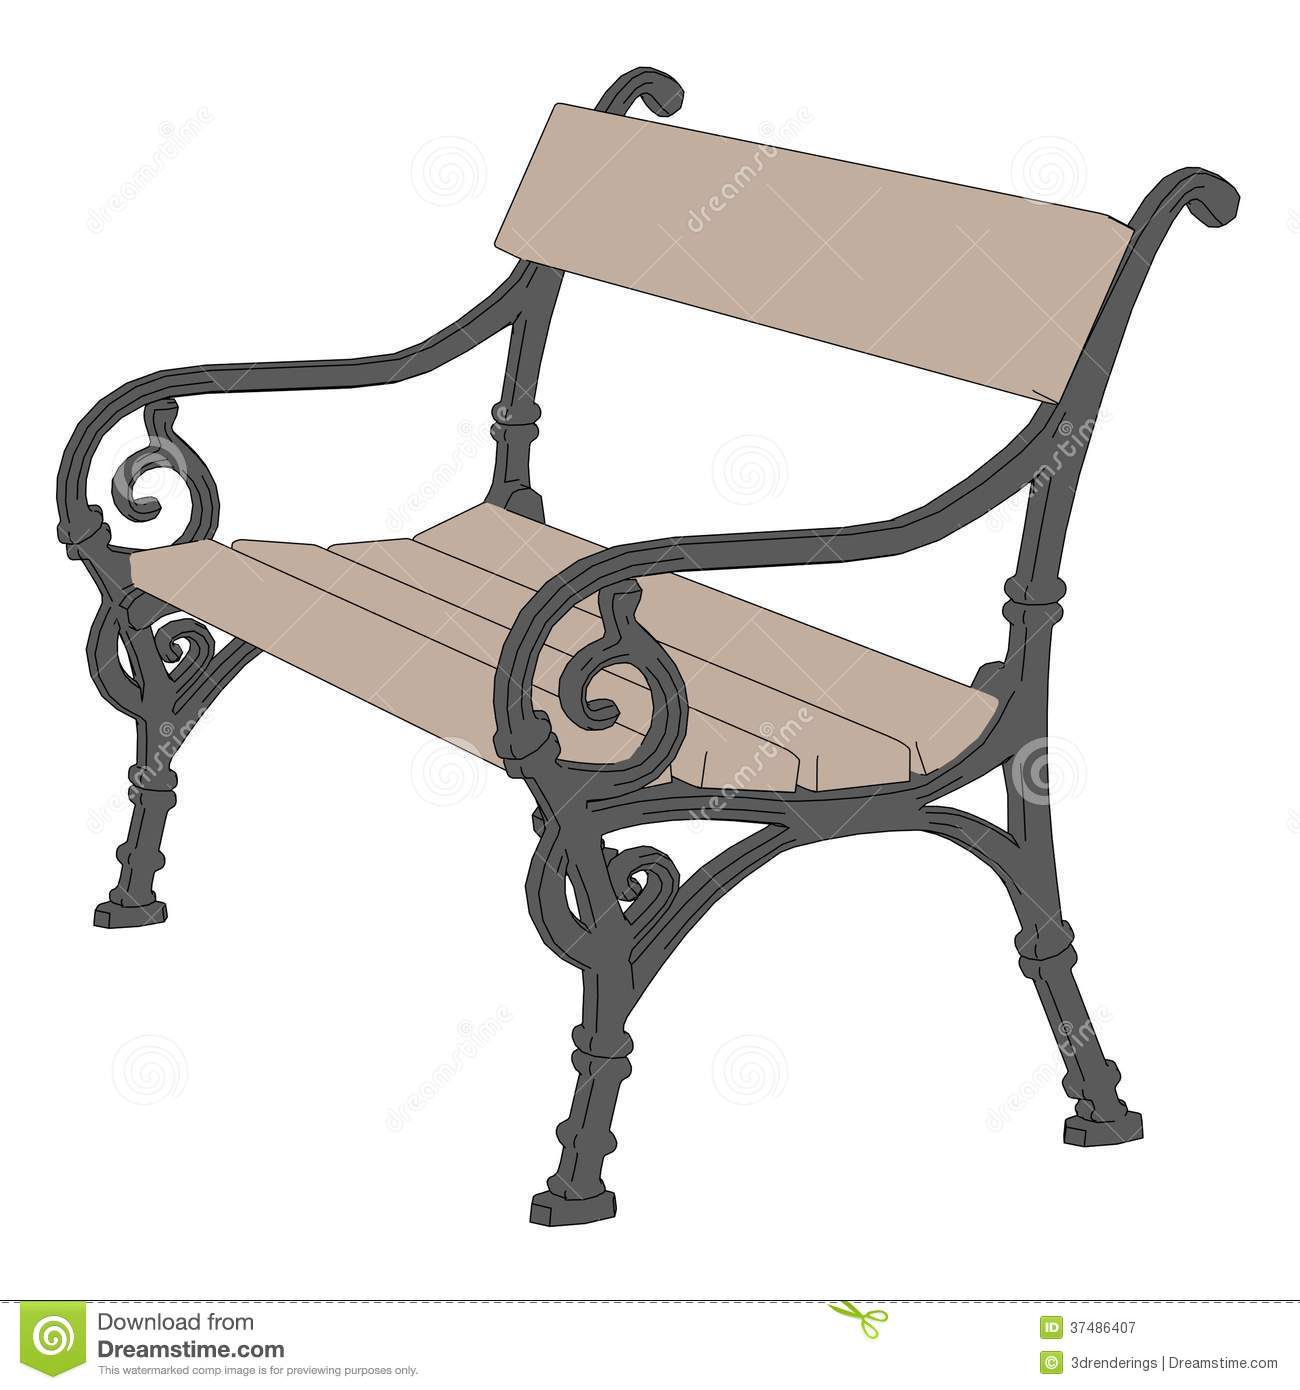 Clipart Park Bench Image Of Park Bench Royalty